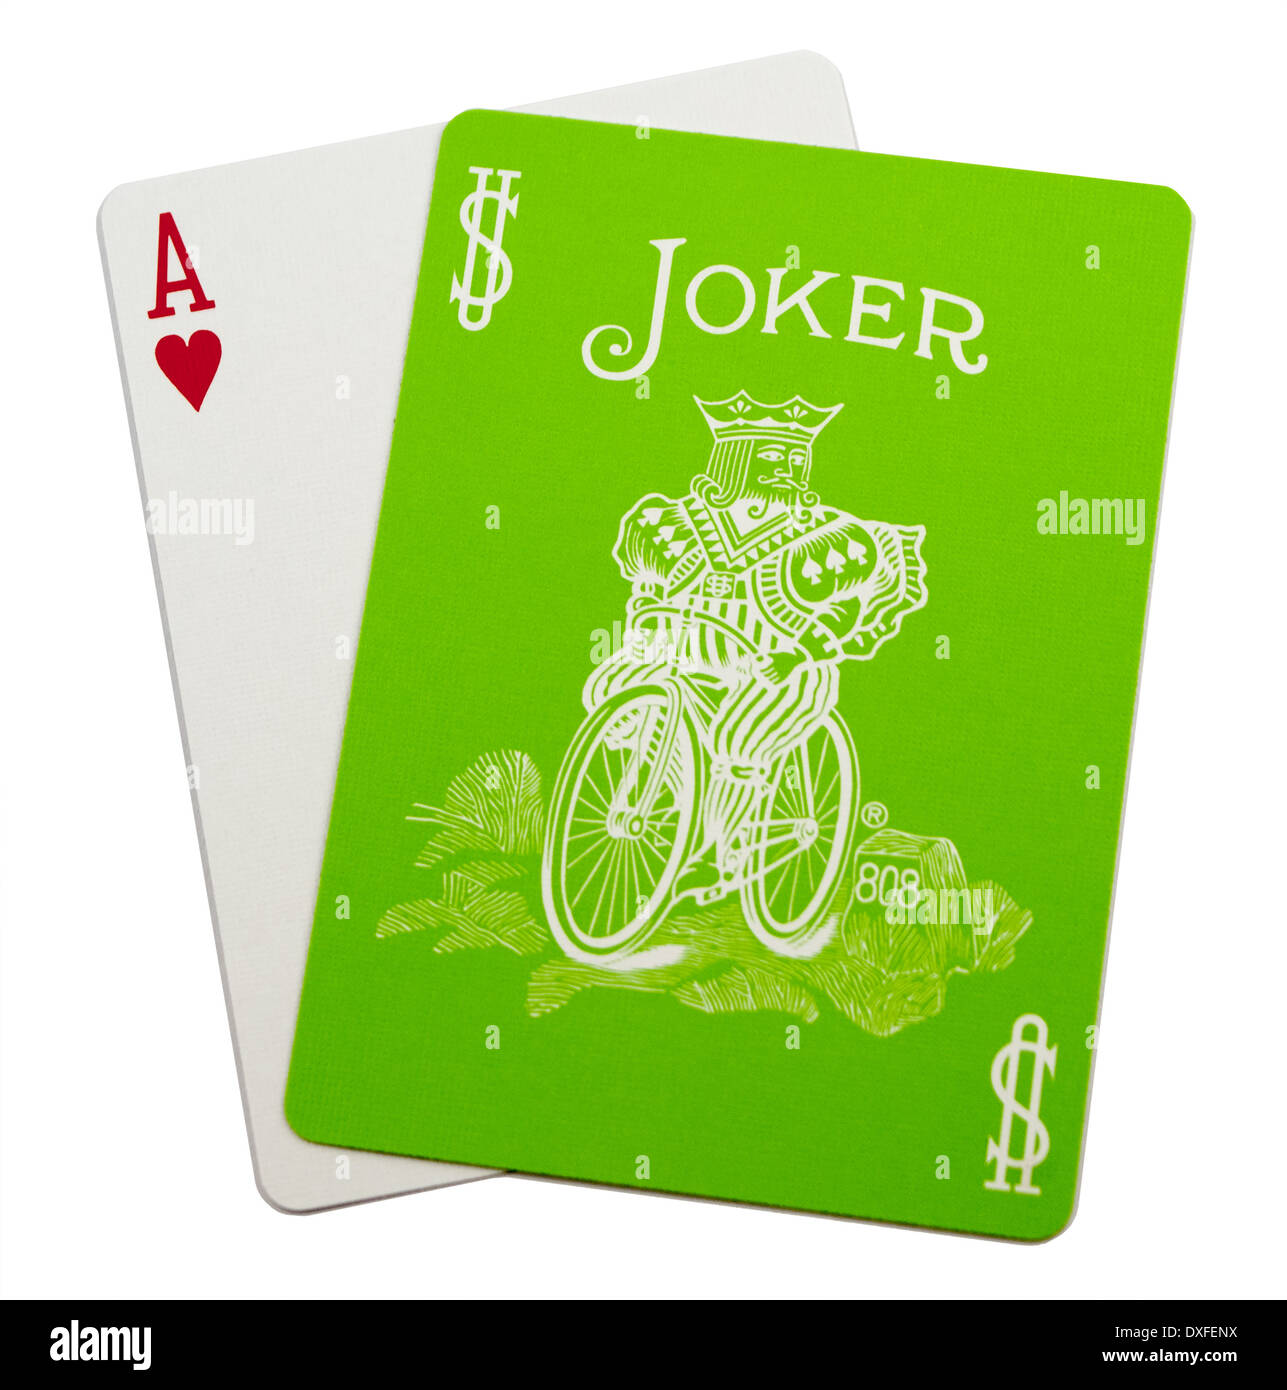 Playing Cards - Hearts Suit Stock Image - Image of hearts, joker: 28467725